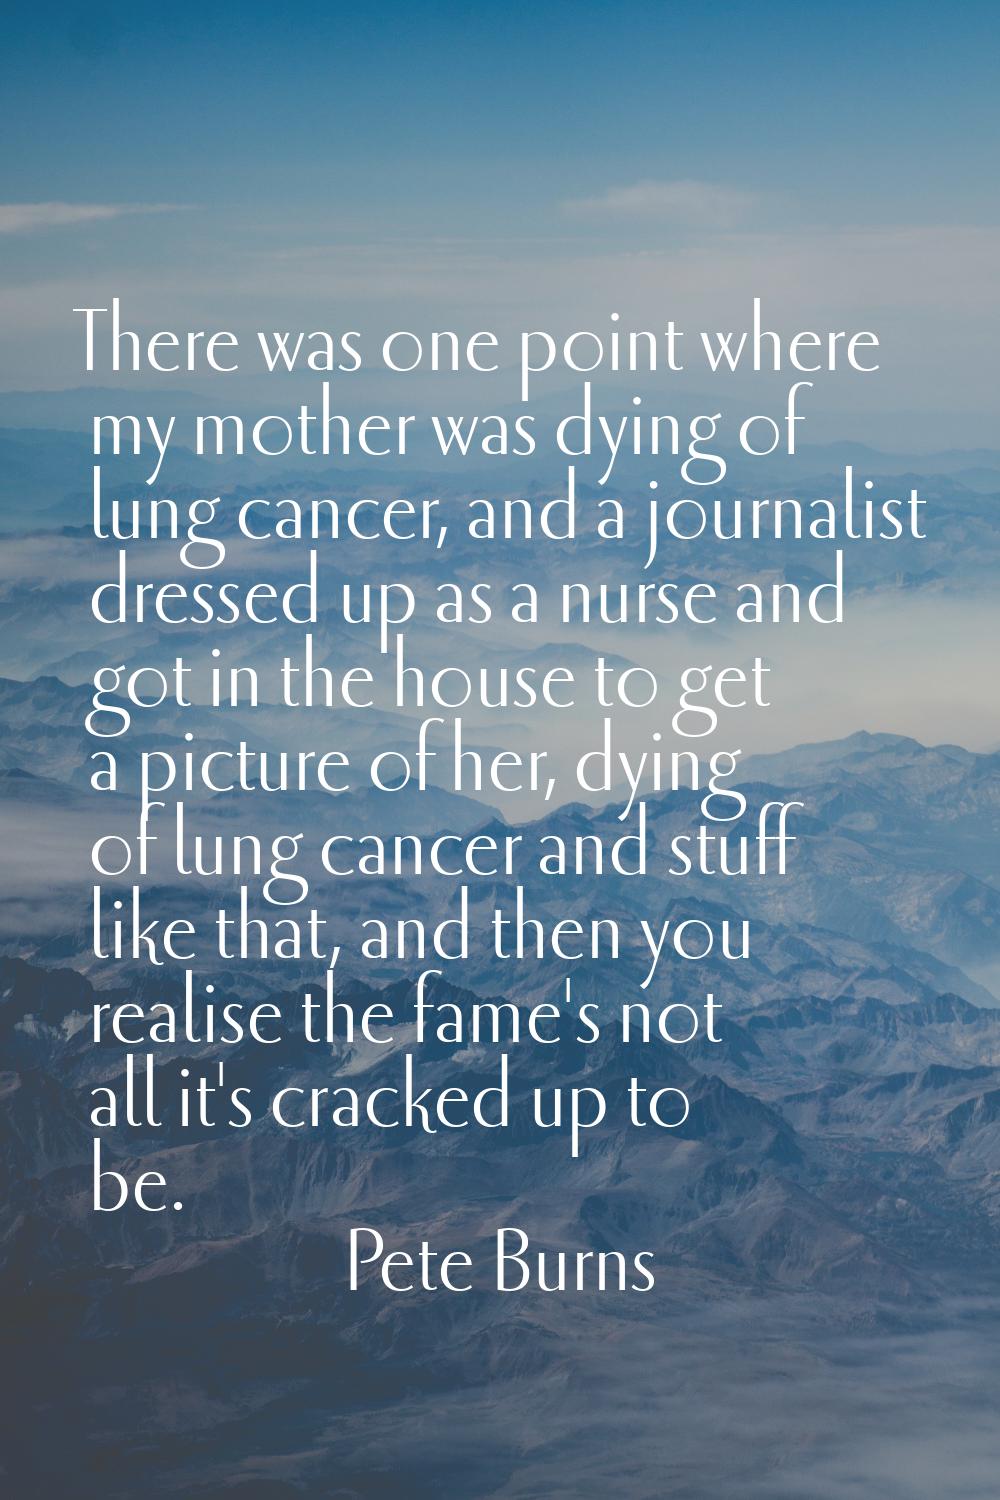 There was one point where my mother was dying of lung cancer, and a journalist dressed up as a nurs